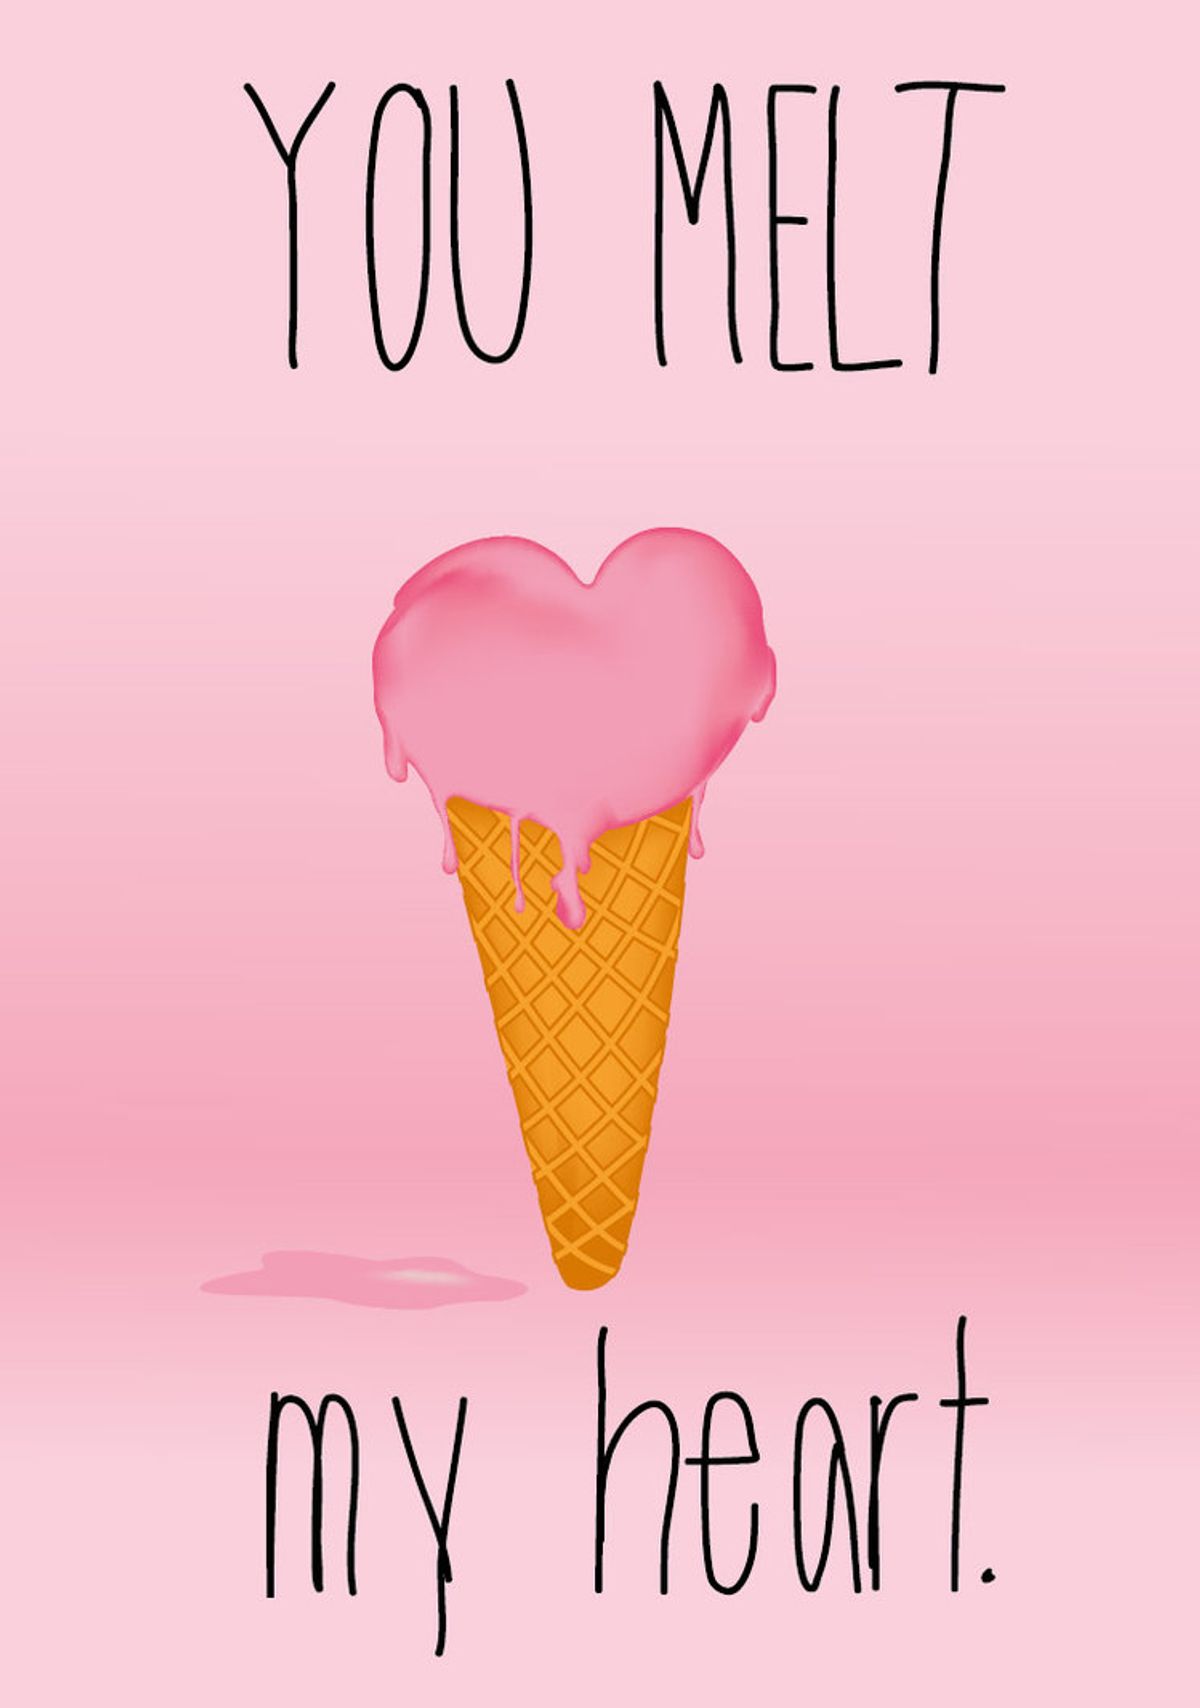 heart in a shape ice cream with text "you melt my heart" 